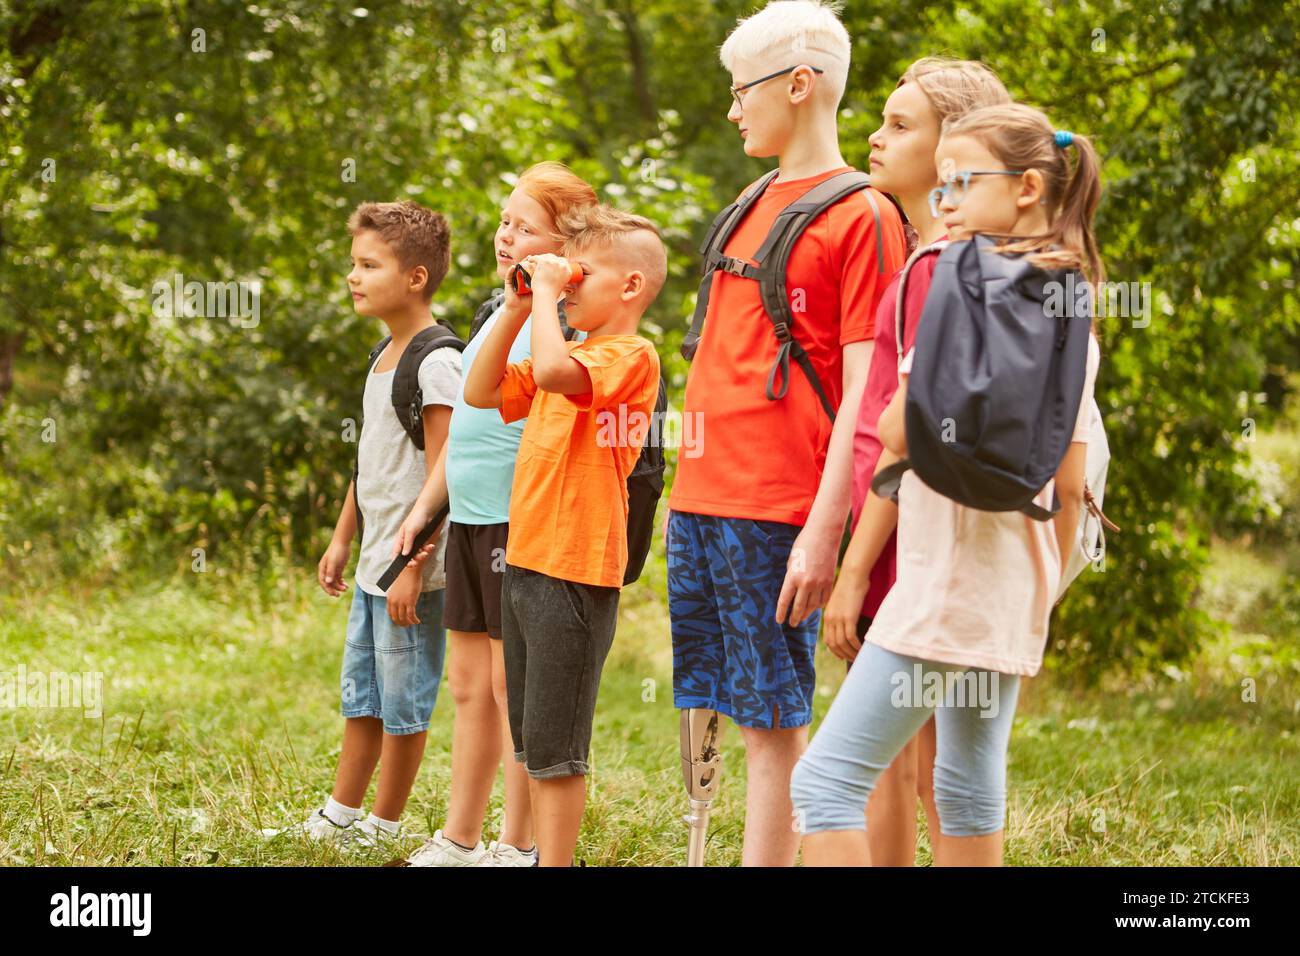 Curious boy looking through binoculars while standing with friends at park Stock Photo